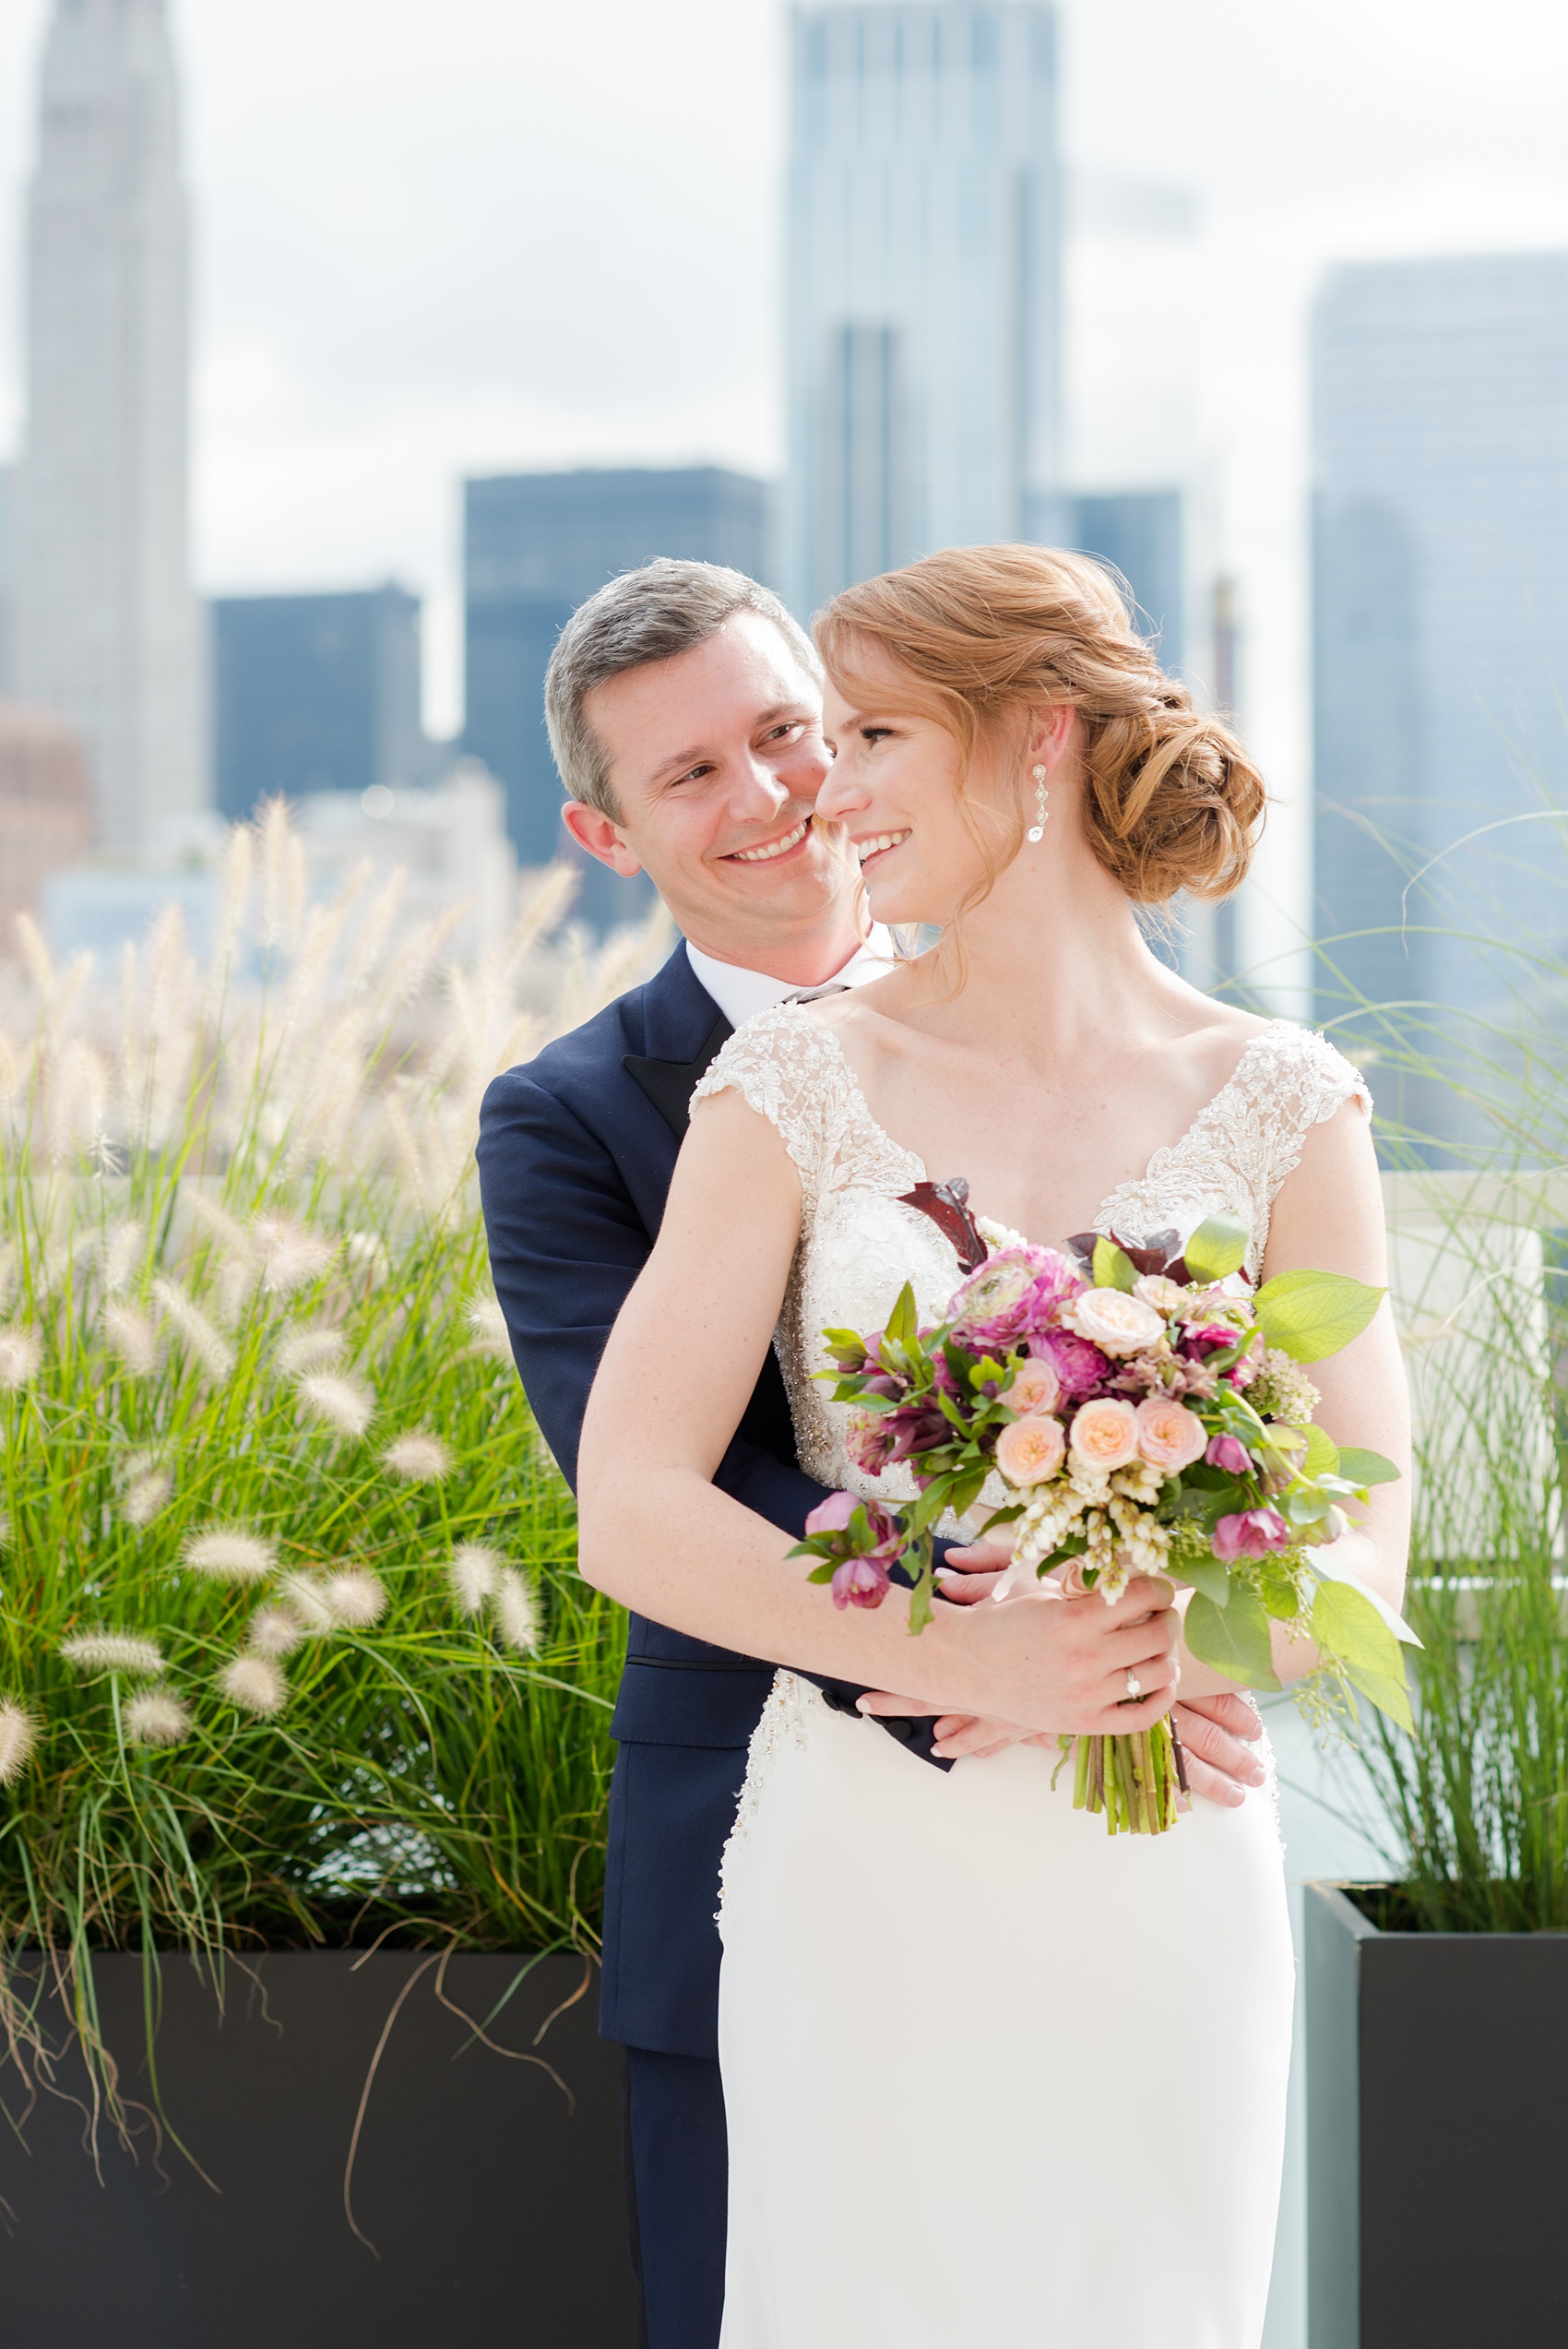 Photos of a NYC wedding venue, Tribeca Rooftop, by Mikkel Paige Photography. This ceremony and reception location has an outdoor space overlooking the Manhattan skyline. These pictures of the bride and groom will provide inspiration in New York! She wore a lace illusion gown with beading, her hair up, and carried a bouquet of fall flowers and he was in a navy suit. Click through for more details from this celebration! #TribecaRooftop #MikkelPaige #NYCwedding #NYCWeddingVenues #BrideandGroom 